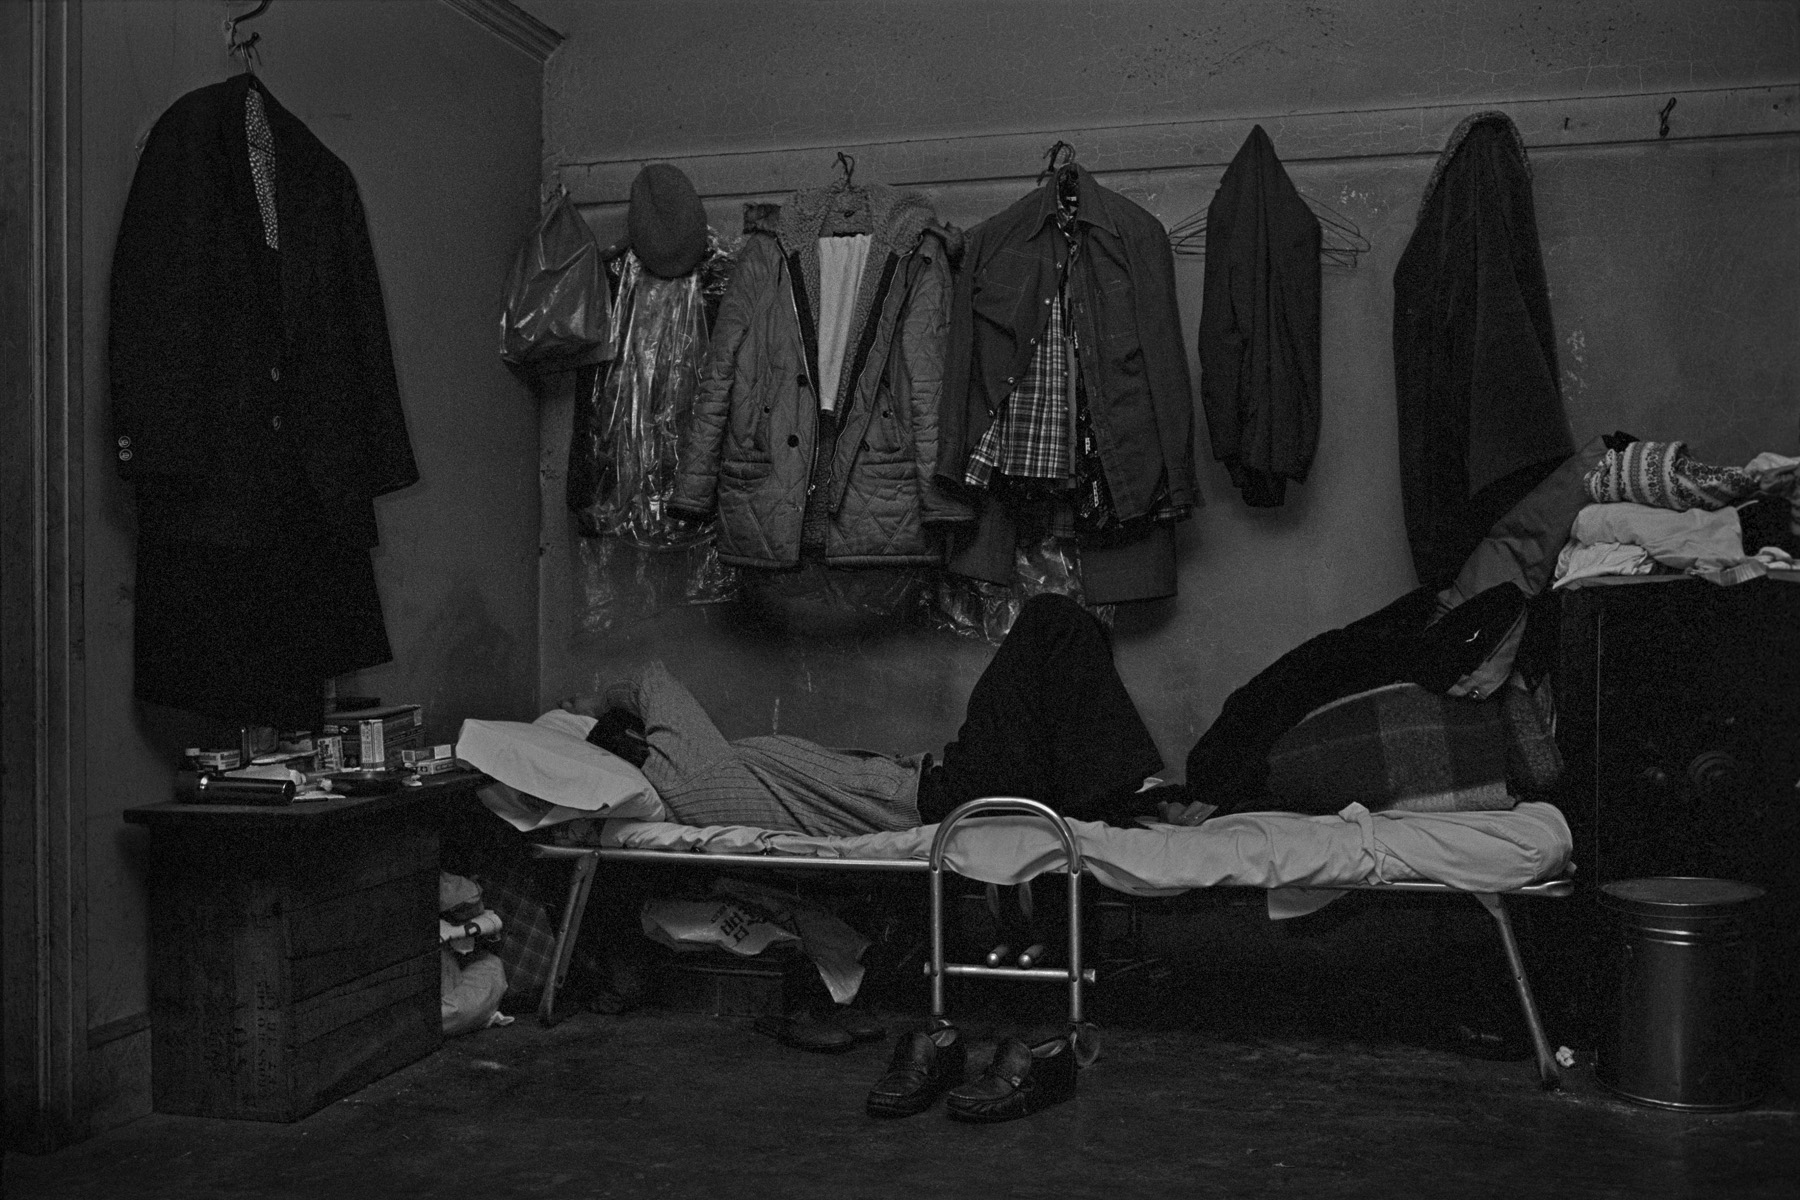 A man sleeps on his bed in the Bachelor Apartment he shares with 3 other men, Bayard St., New York Chinatown, 1982. He is surrounded by his belongings, including coats and jackets hanging on the wall above him.